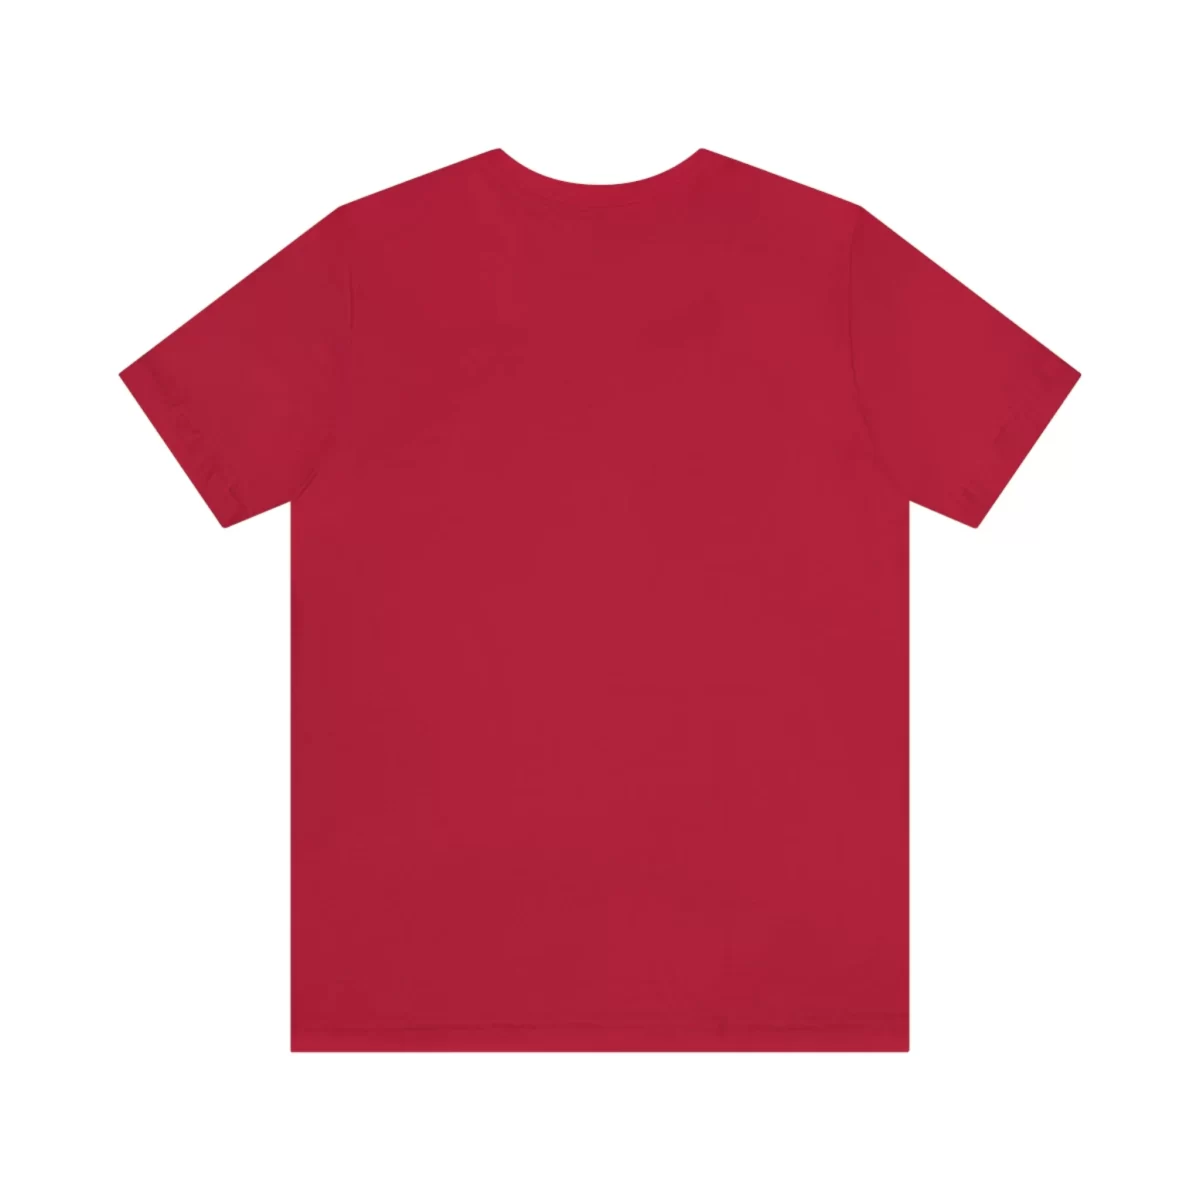 Unisex T Shirt Awesome Red Back